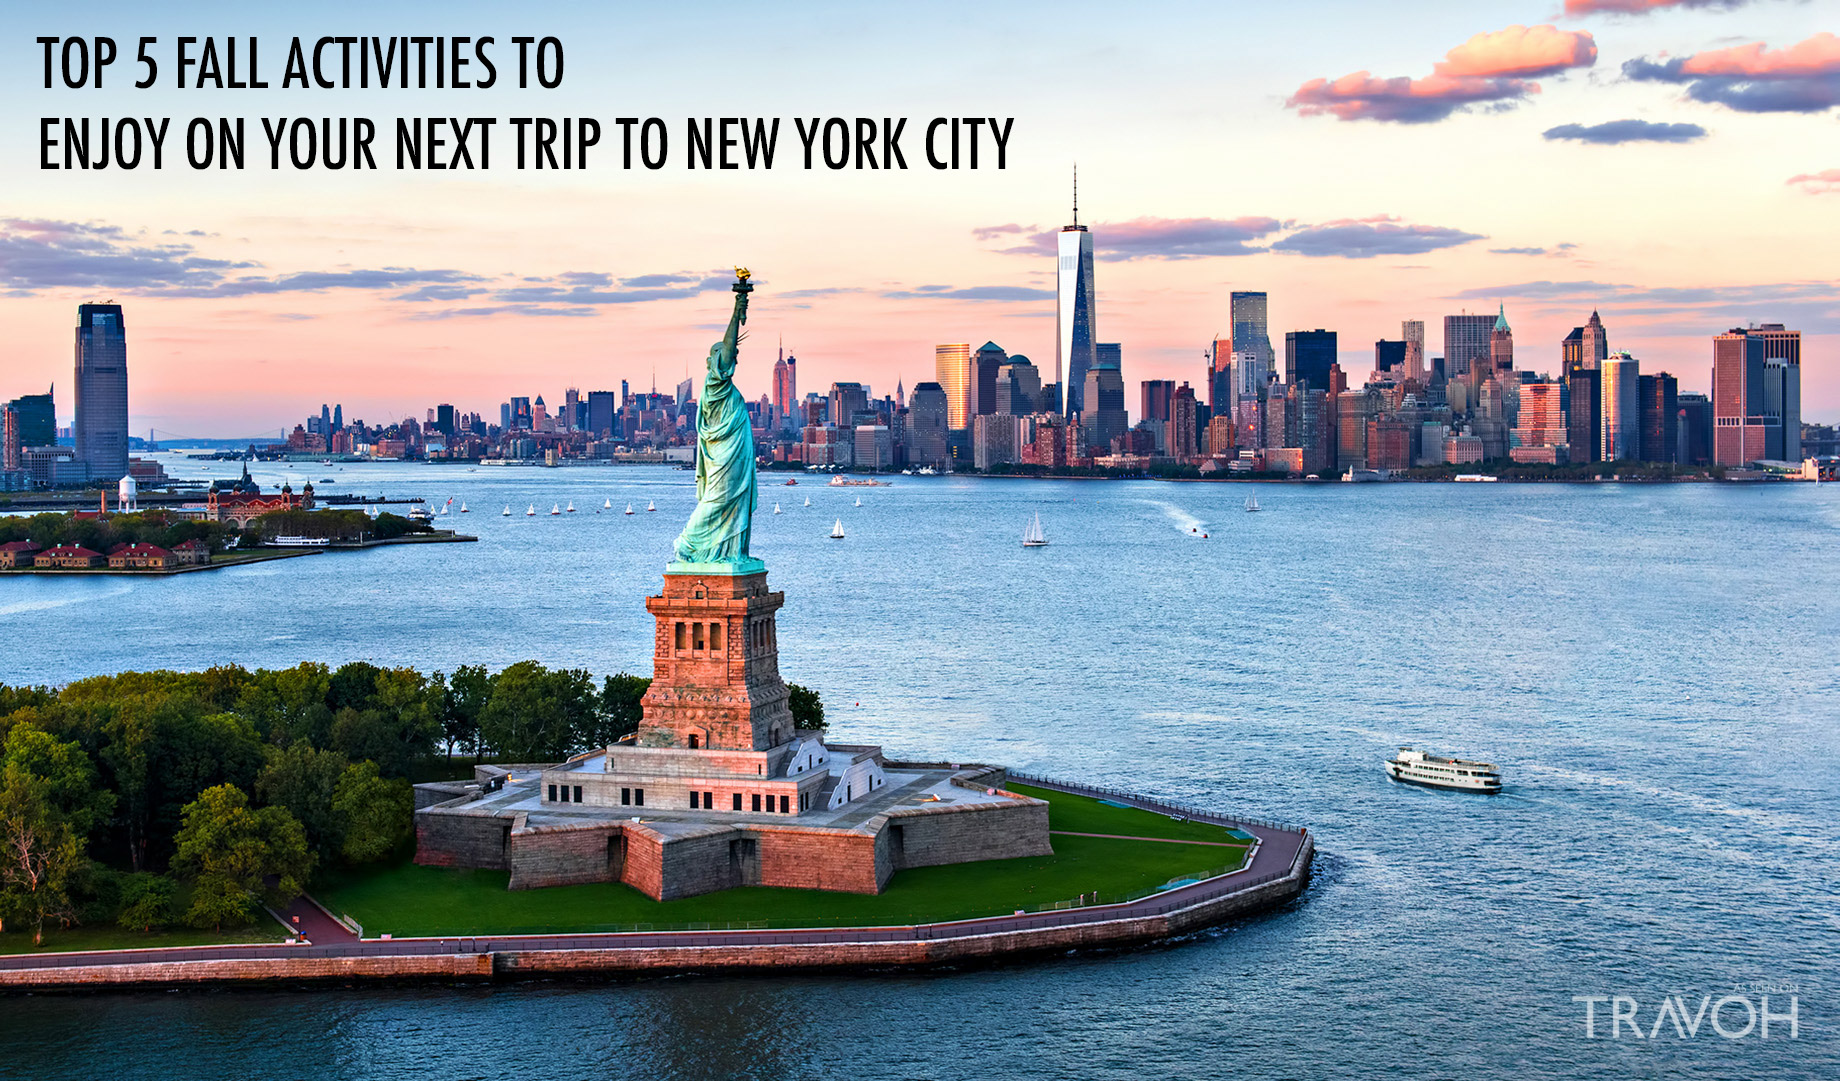 Top 5 Fall Activities to Enjoy on Your Next Trip to New York City